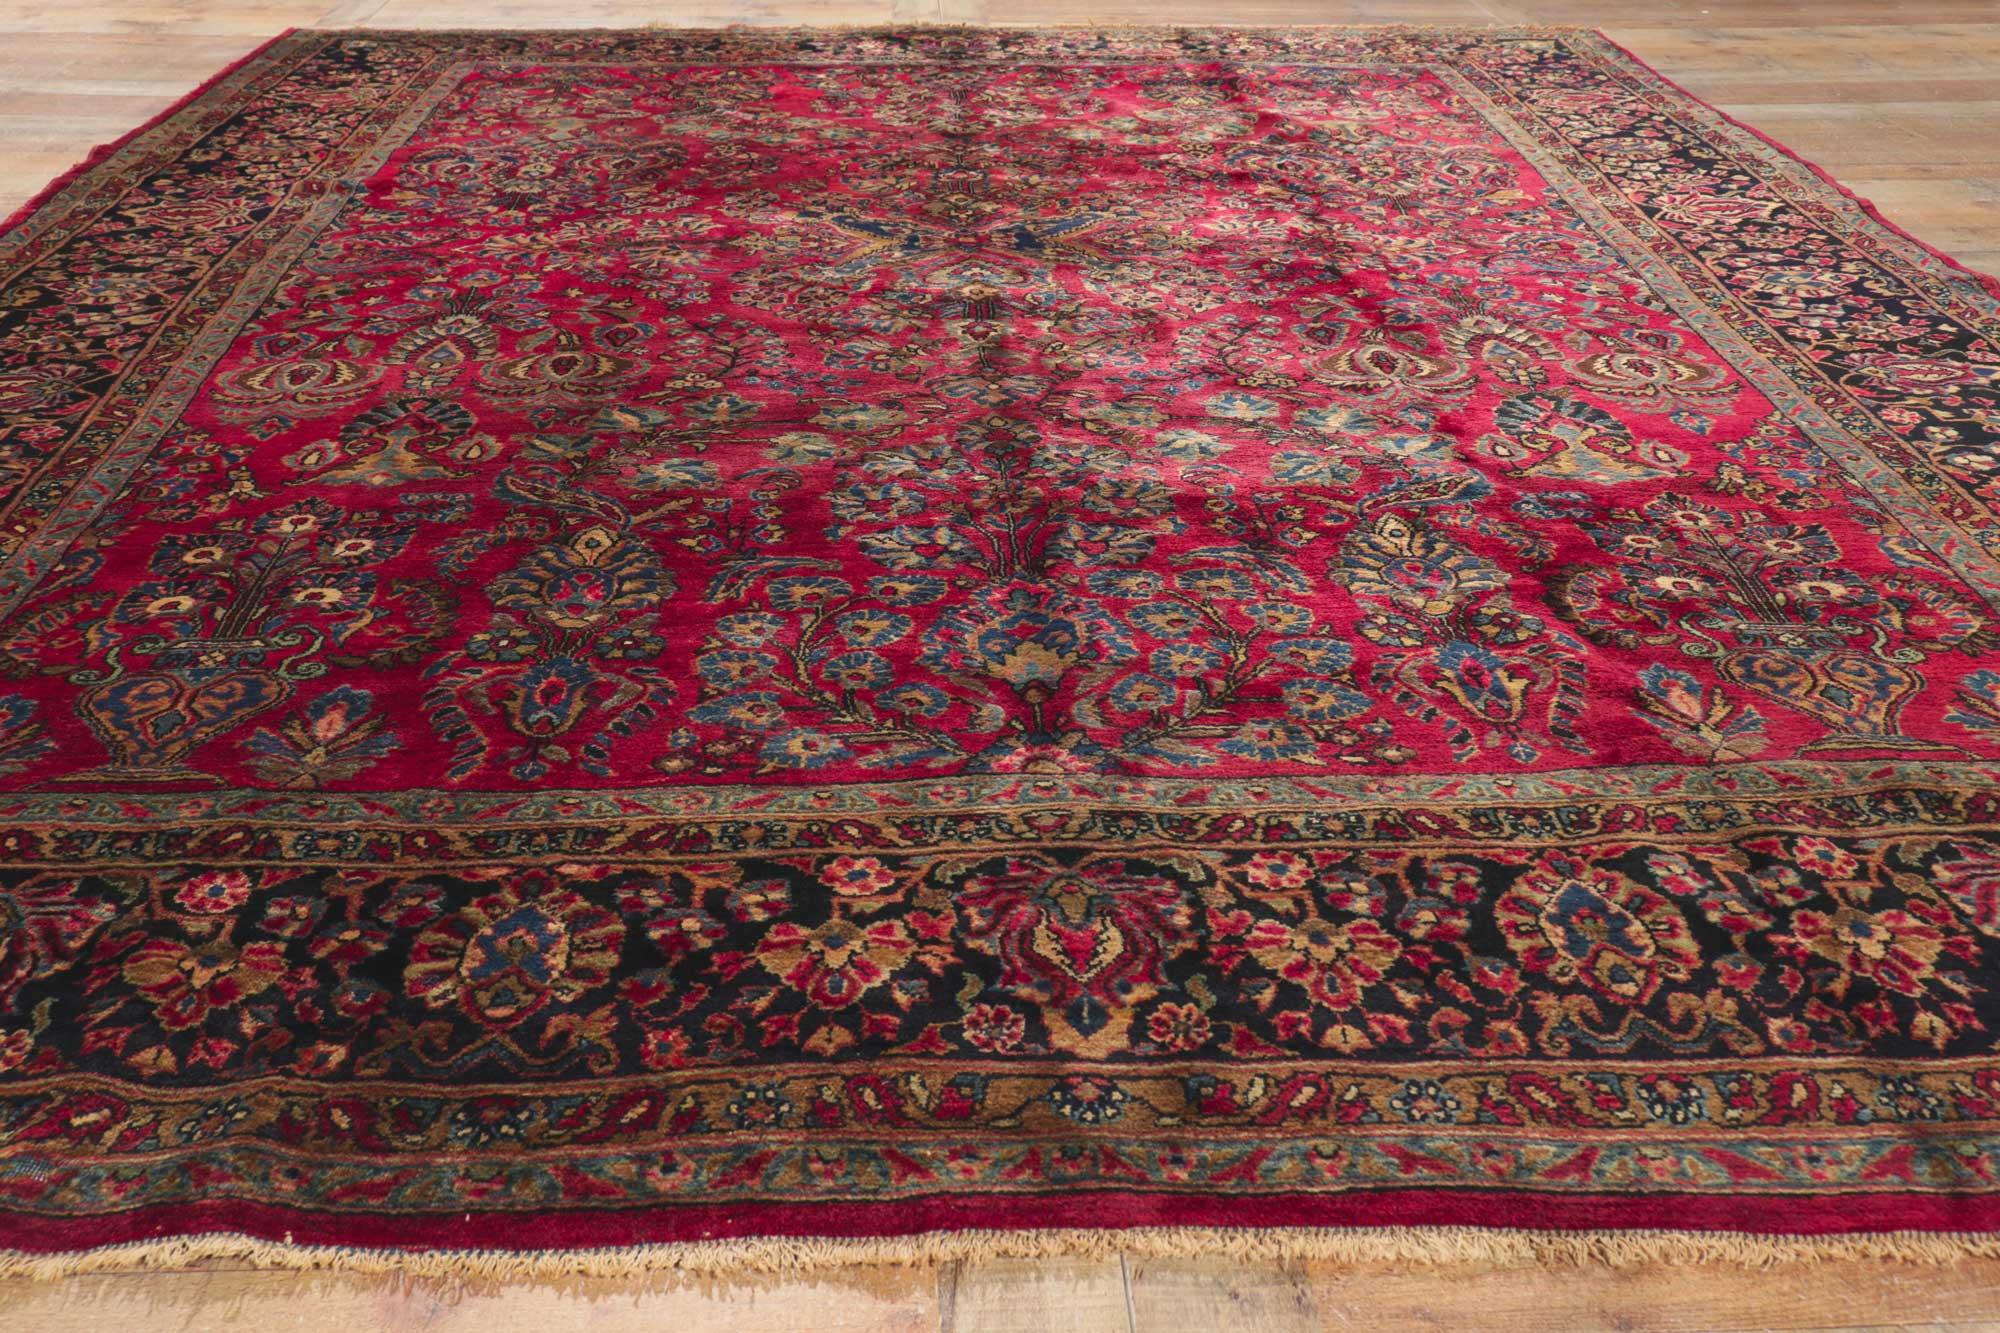 ?77787 antique Persian Mohajeran Sarouk rug 09'03 x 11'05. With its beguiling beauty and rich jewel-tones, this hand knotted wool antique Persian Sarouk rug is poised to impress. The abrashed burgundy field features an all-over botanical pattern